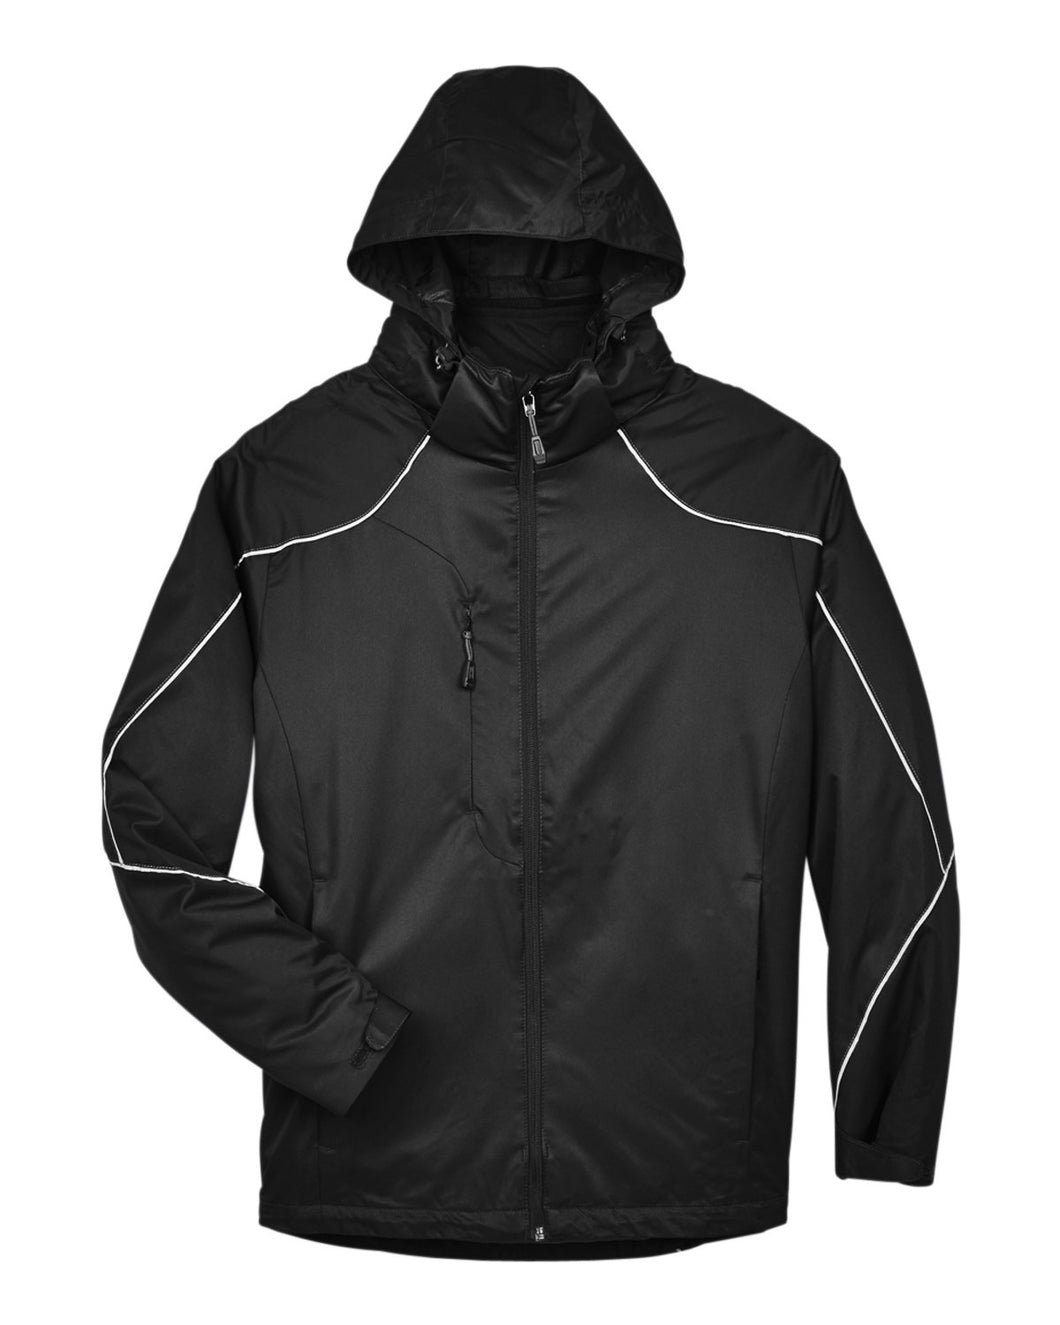 Angle 3-in-1 Jacket with Bonded Fleece Liner